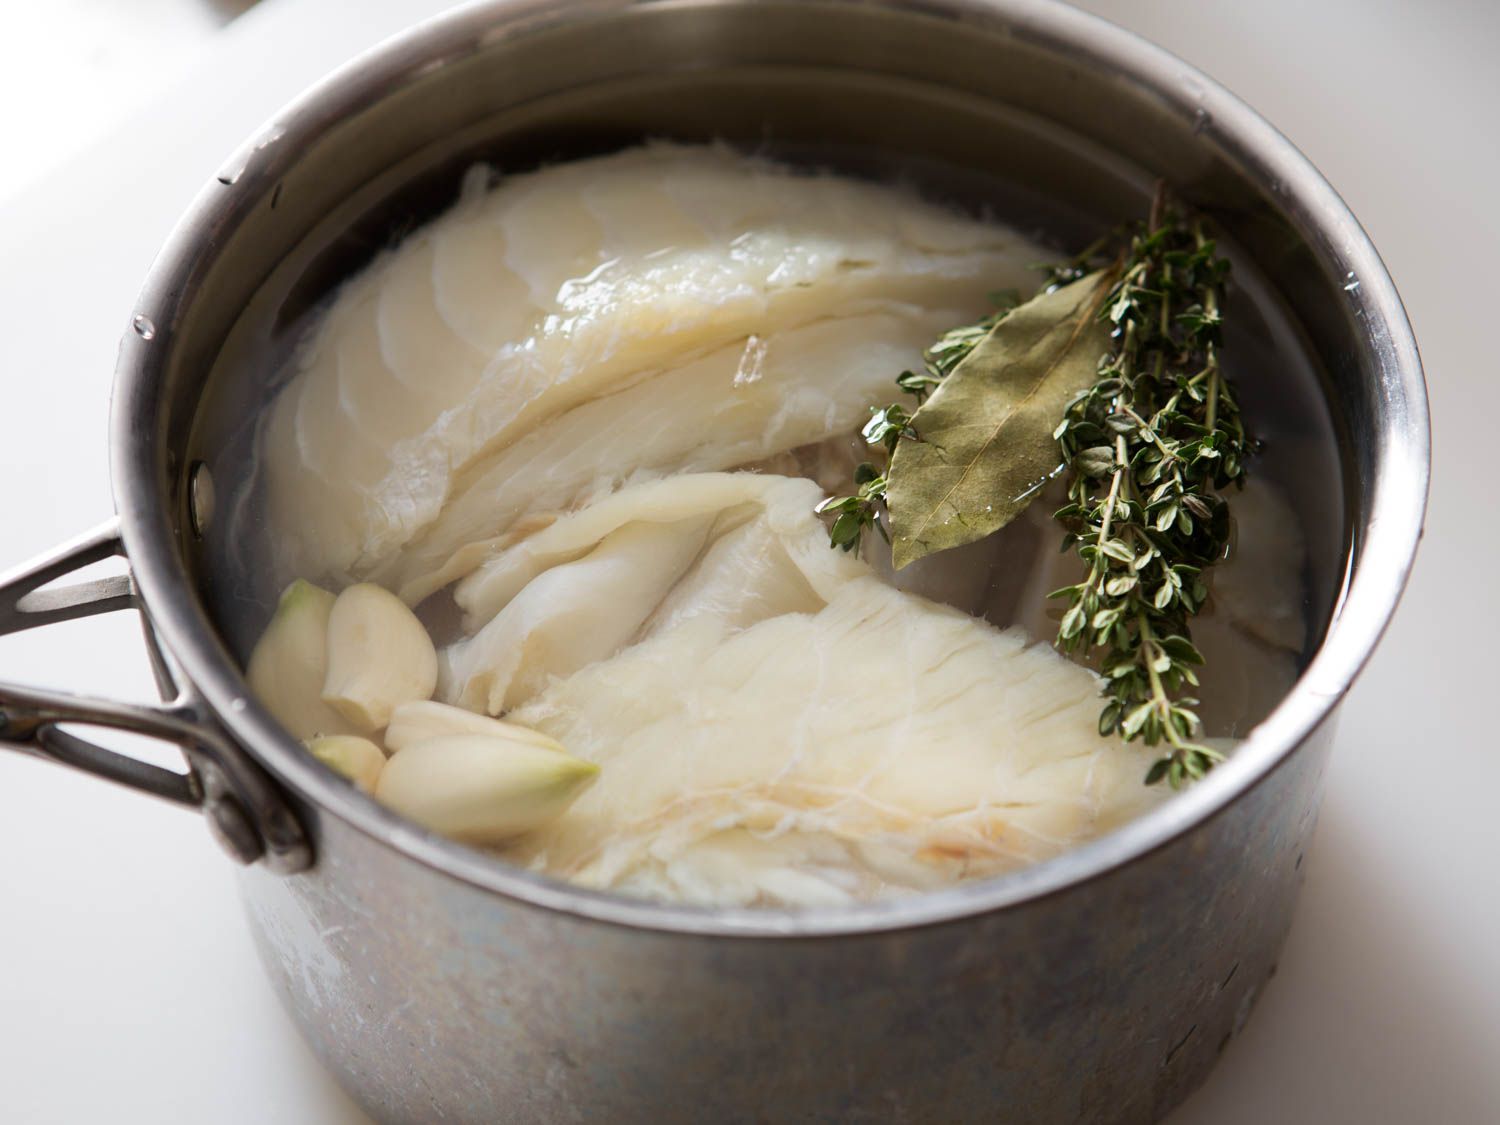 A stainless steel pot containing salt cod, water, garlic, fresh thyme, and a dried bay leaf.